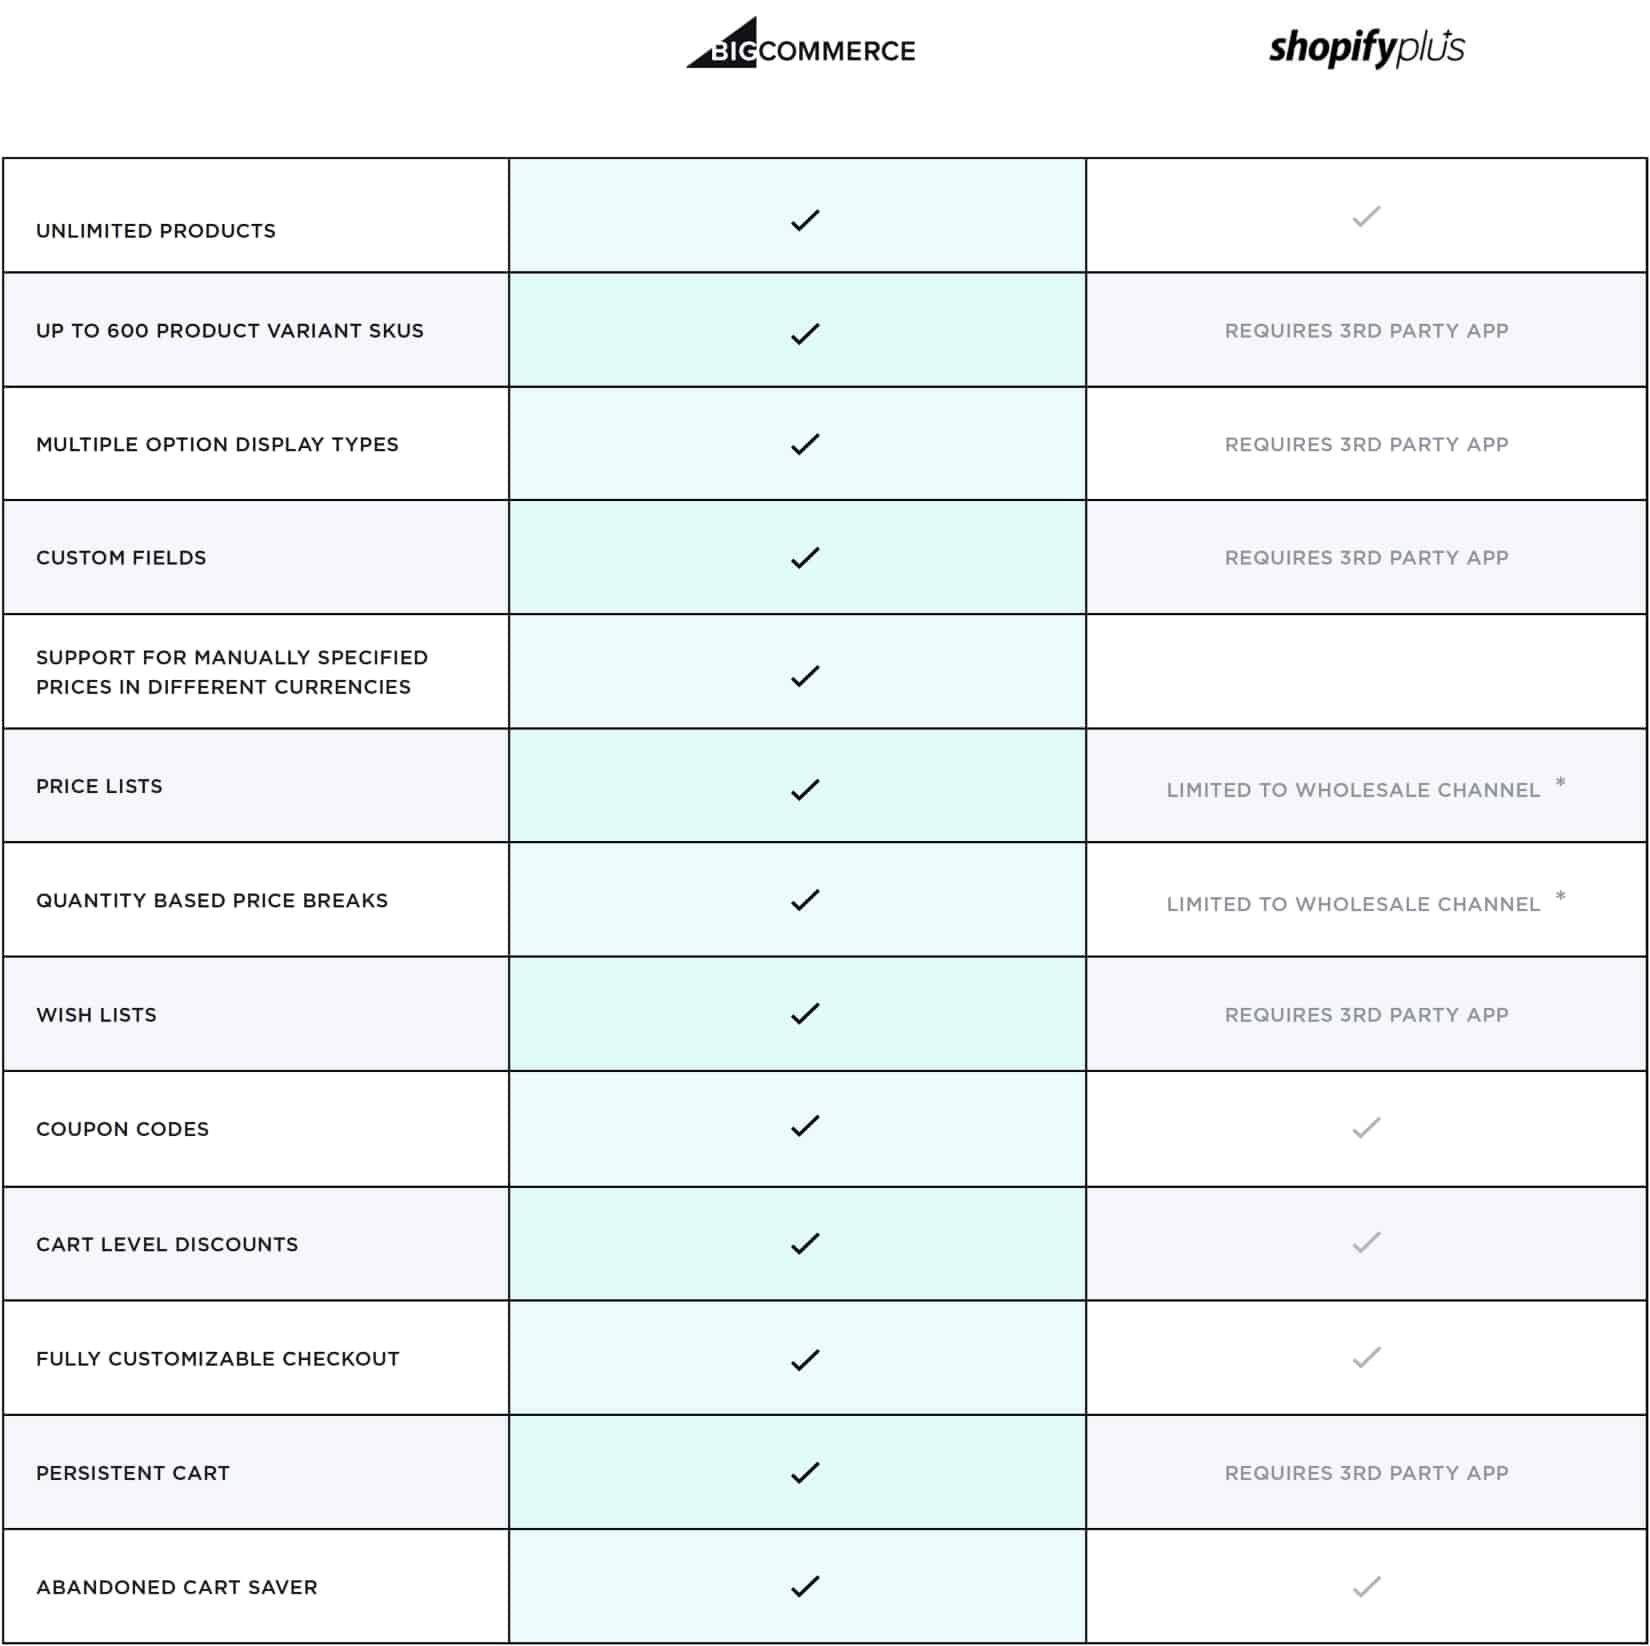 BigCommerce Vs Shopify- FEATURES